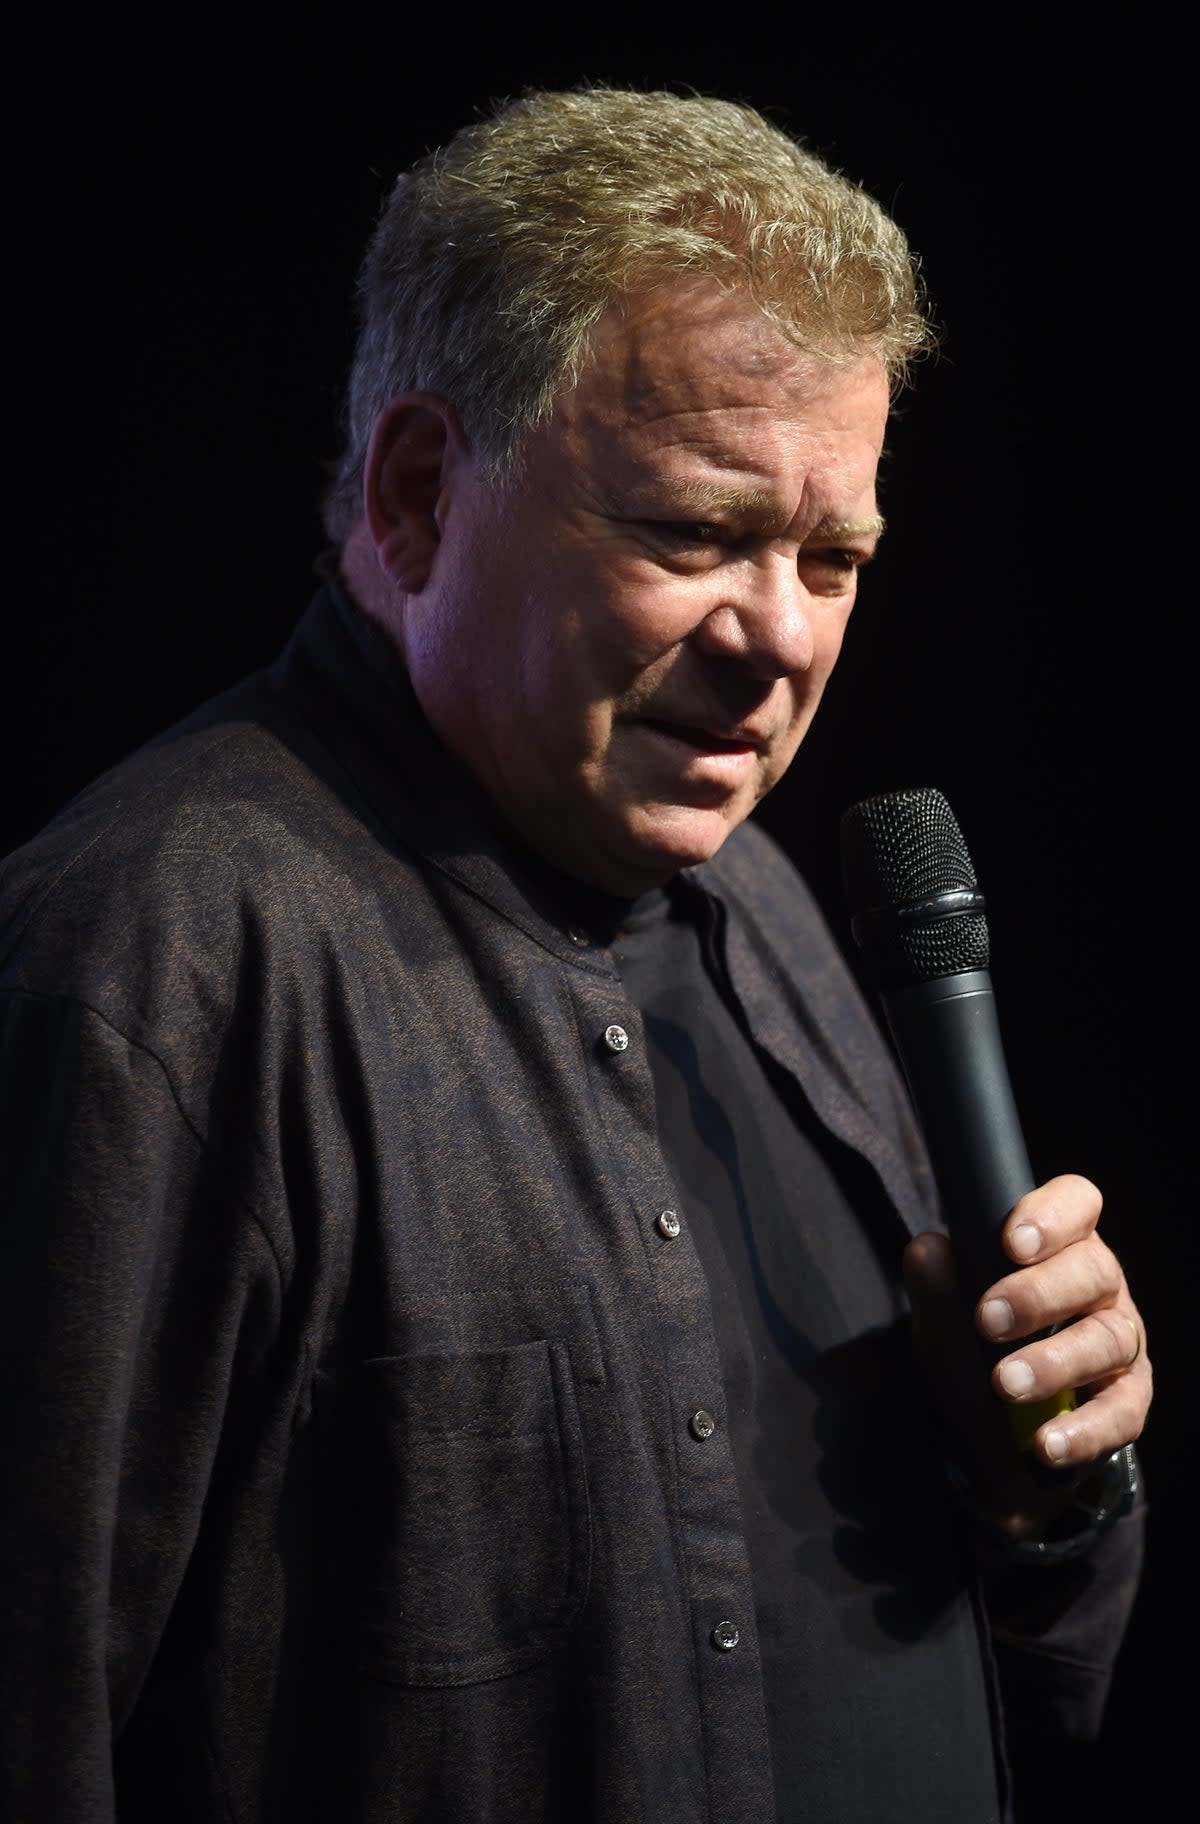 William Shatner ‘couldn’t stop crying’ after Blue Origin space flight (PA)